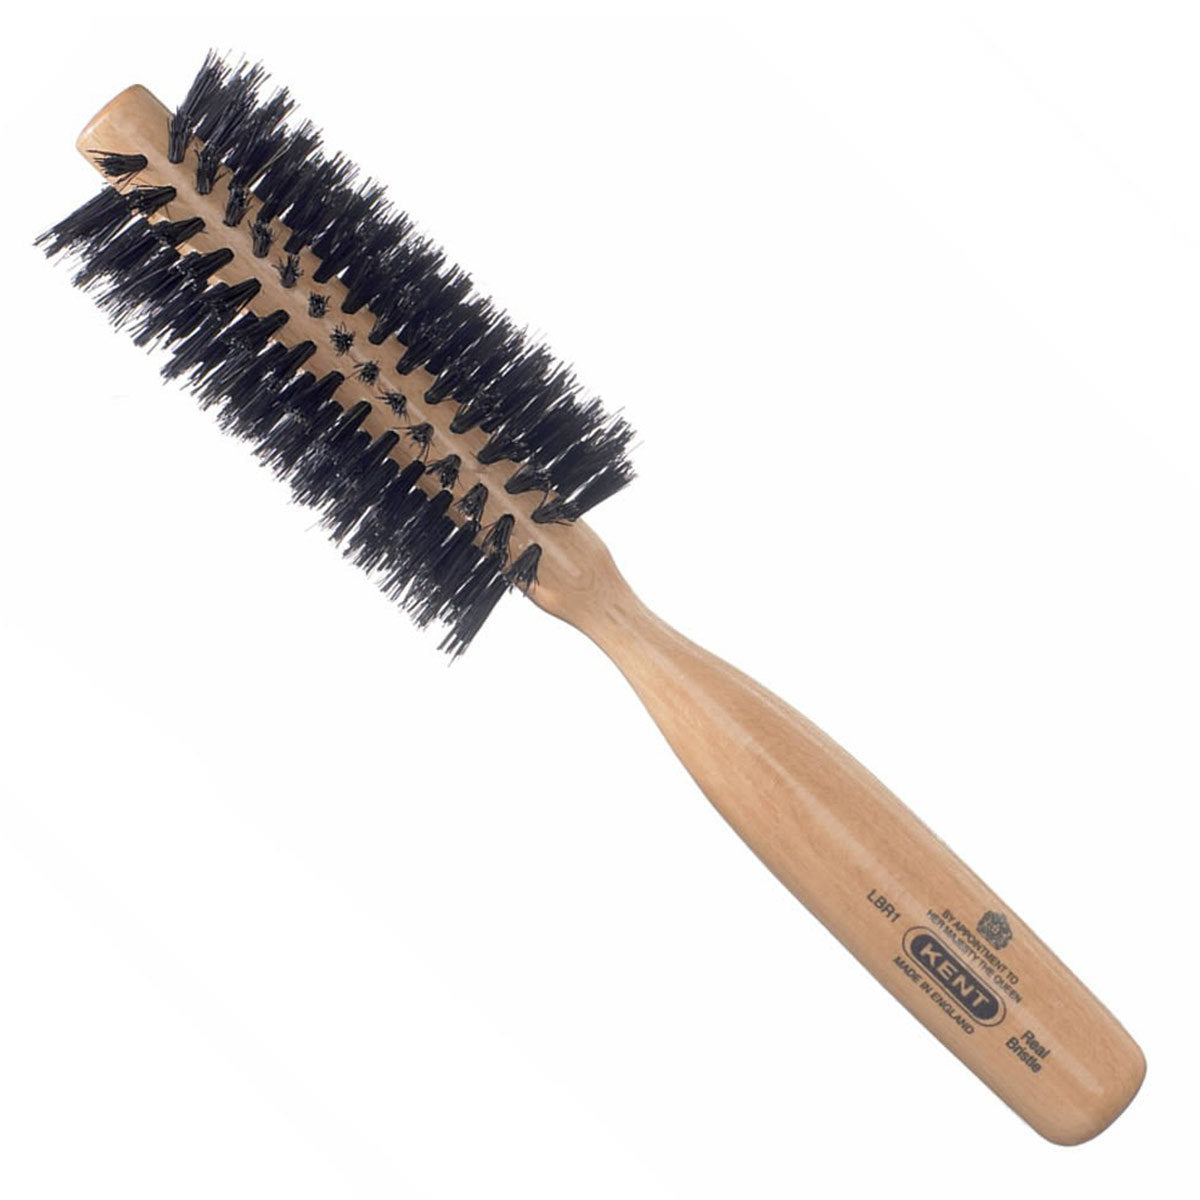 Primary image of Ladies' Spiral Bristle Small Hairbrush - LBR1